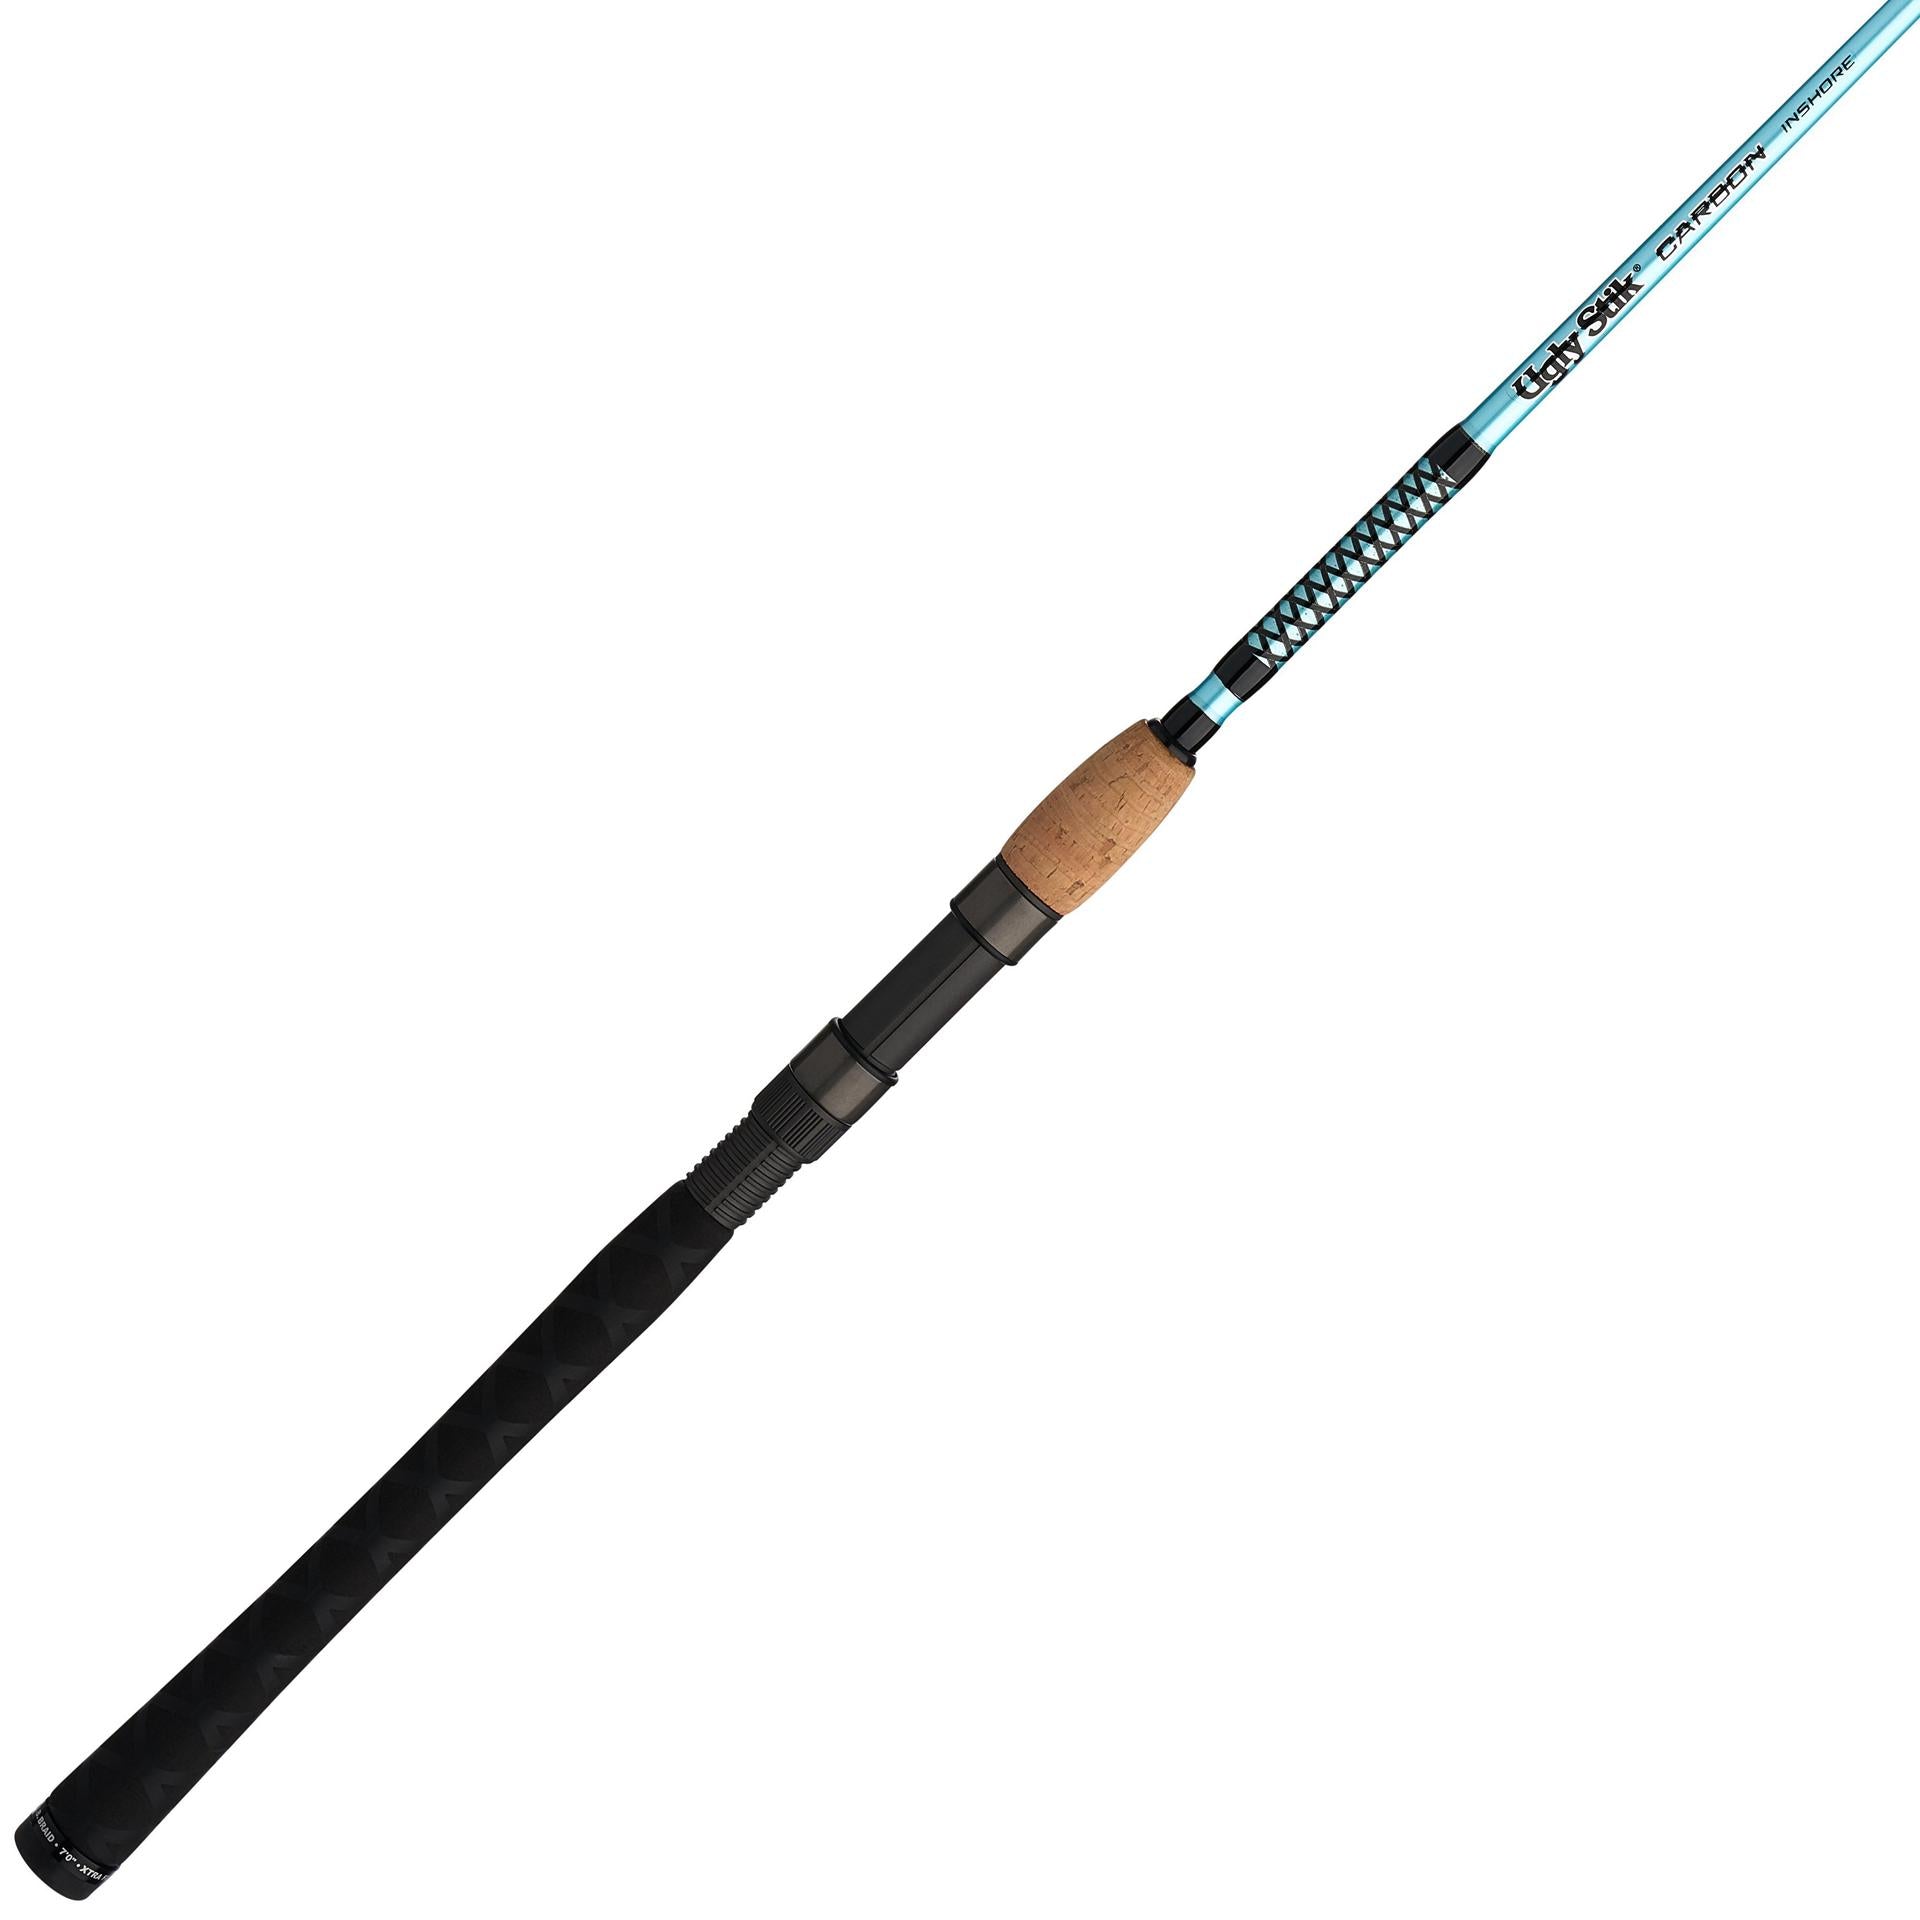 Carbon Inshore Spinning Rod | Ugly Stik®